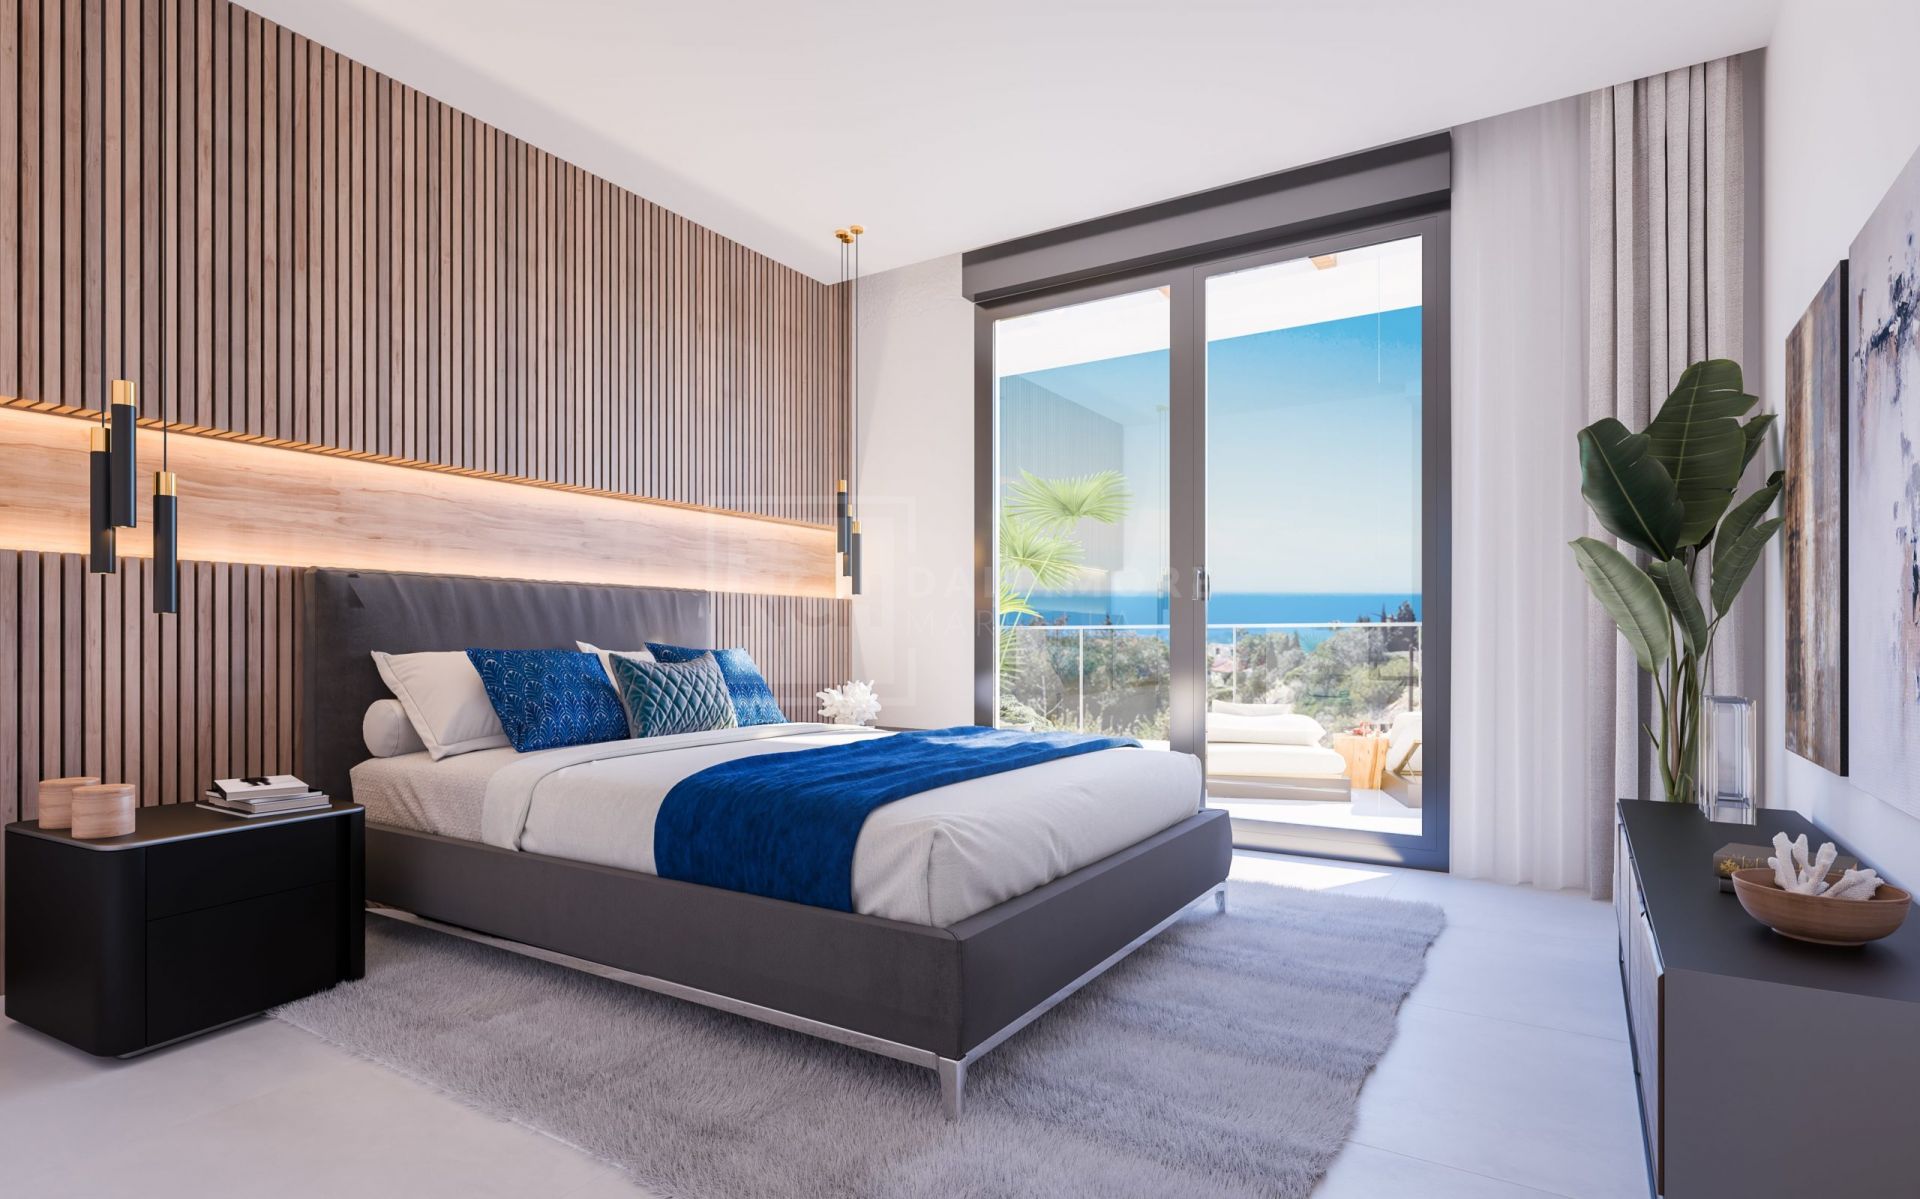 BRAND NEW LUXURY CONTEMPORARY 3-BEDROOM APARTMENT EAST MARBELLA